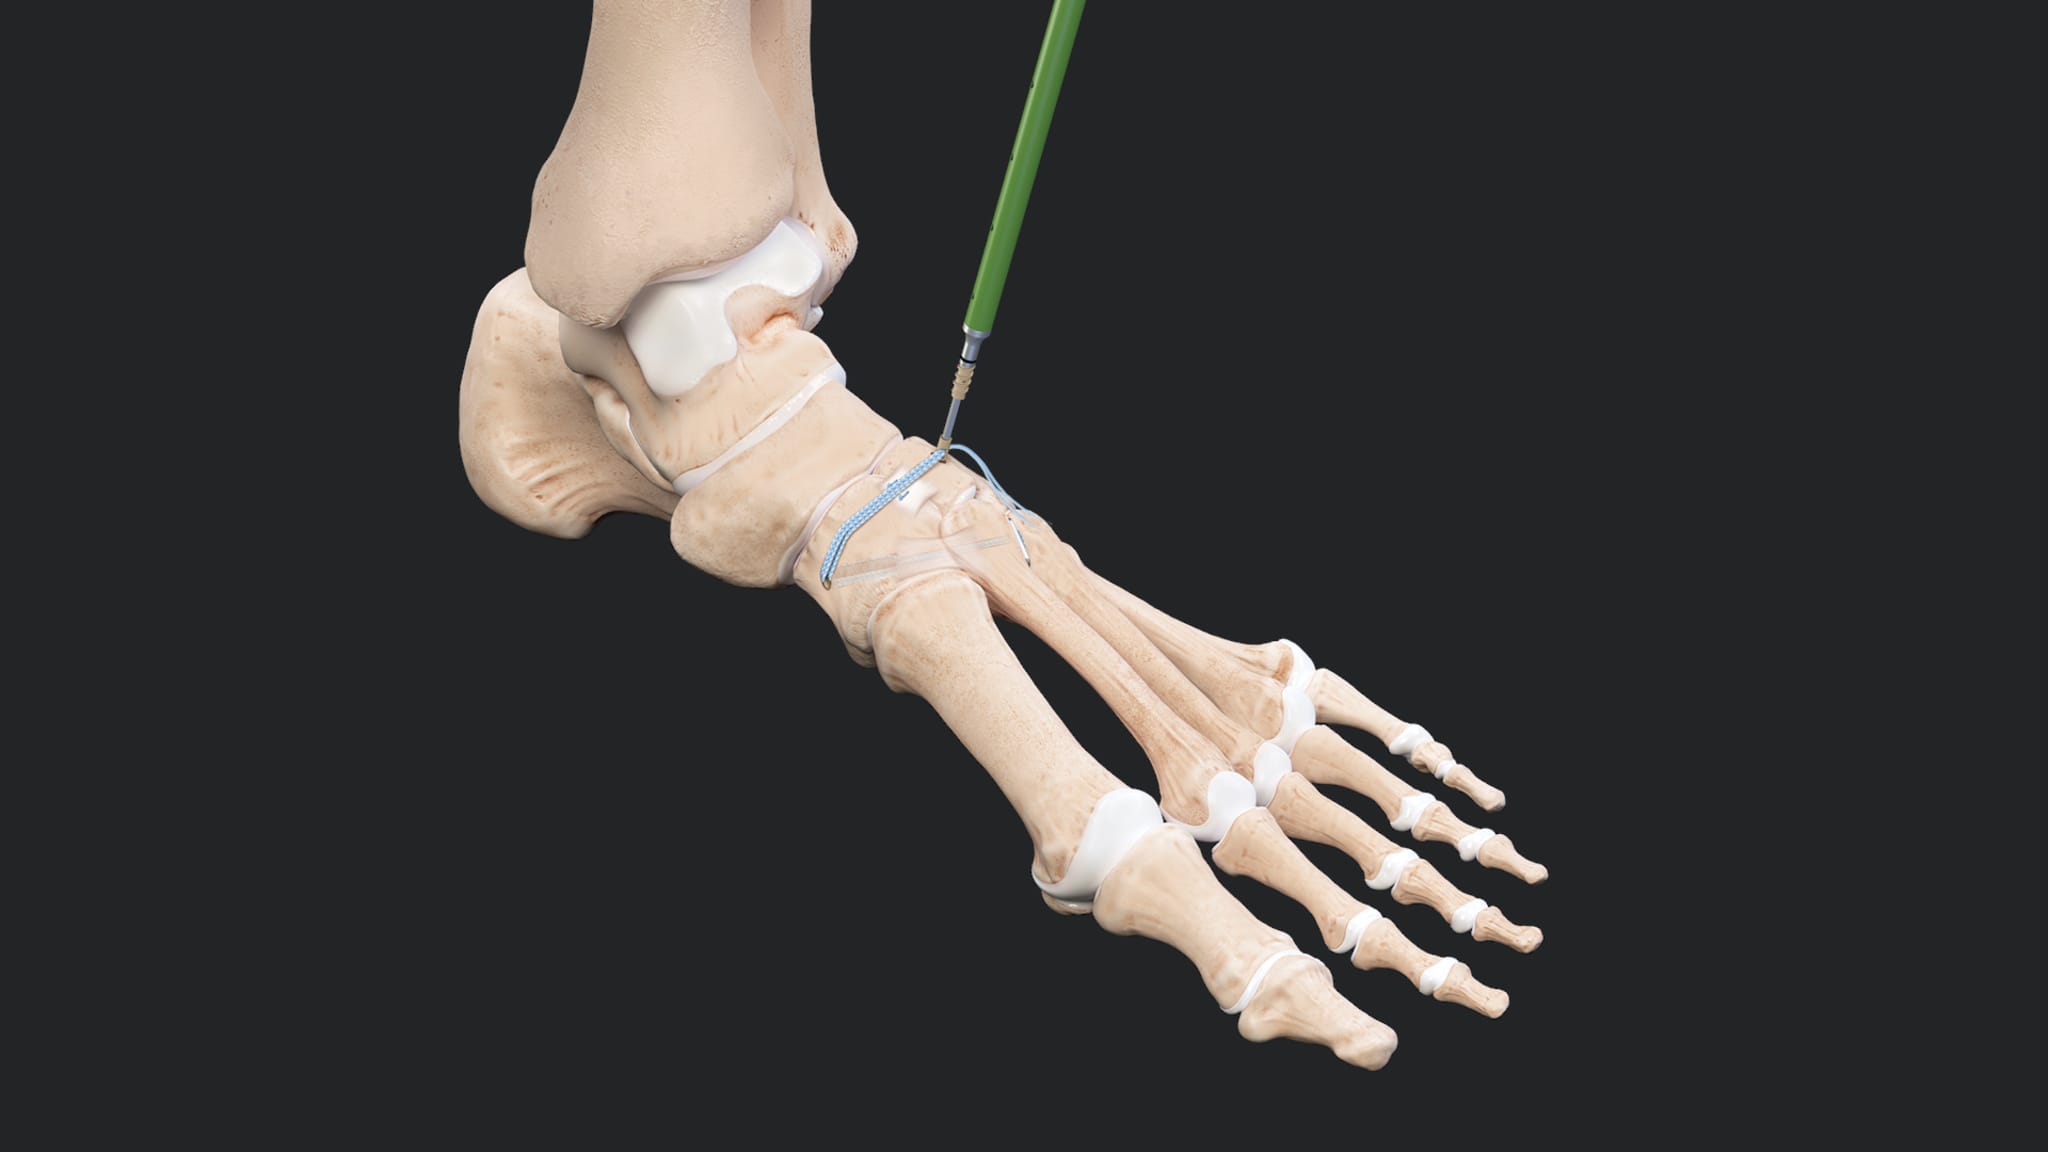 Lisfranc Repair With the InternalBrace™ Technique: Indications, Rationale, and Outcomes